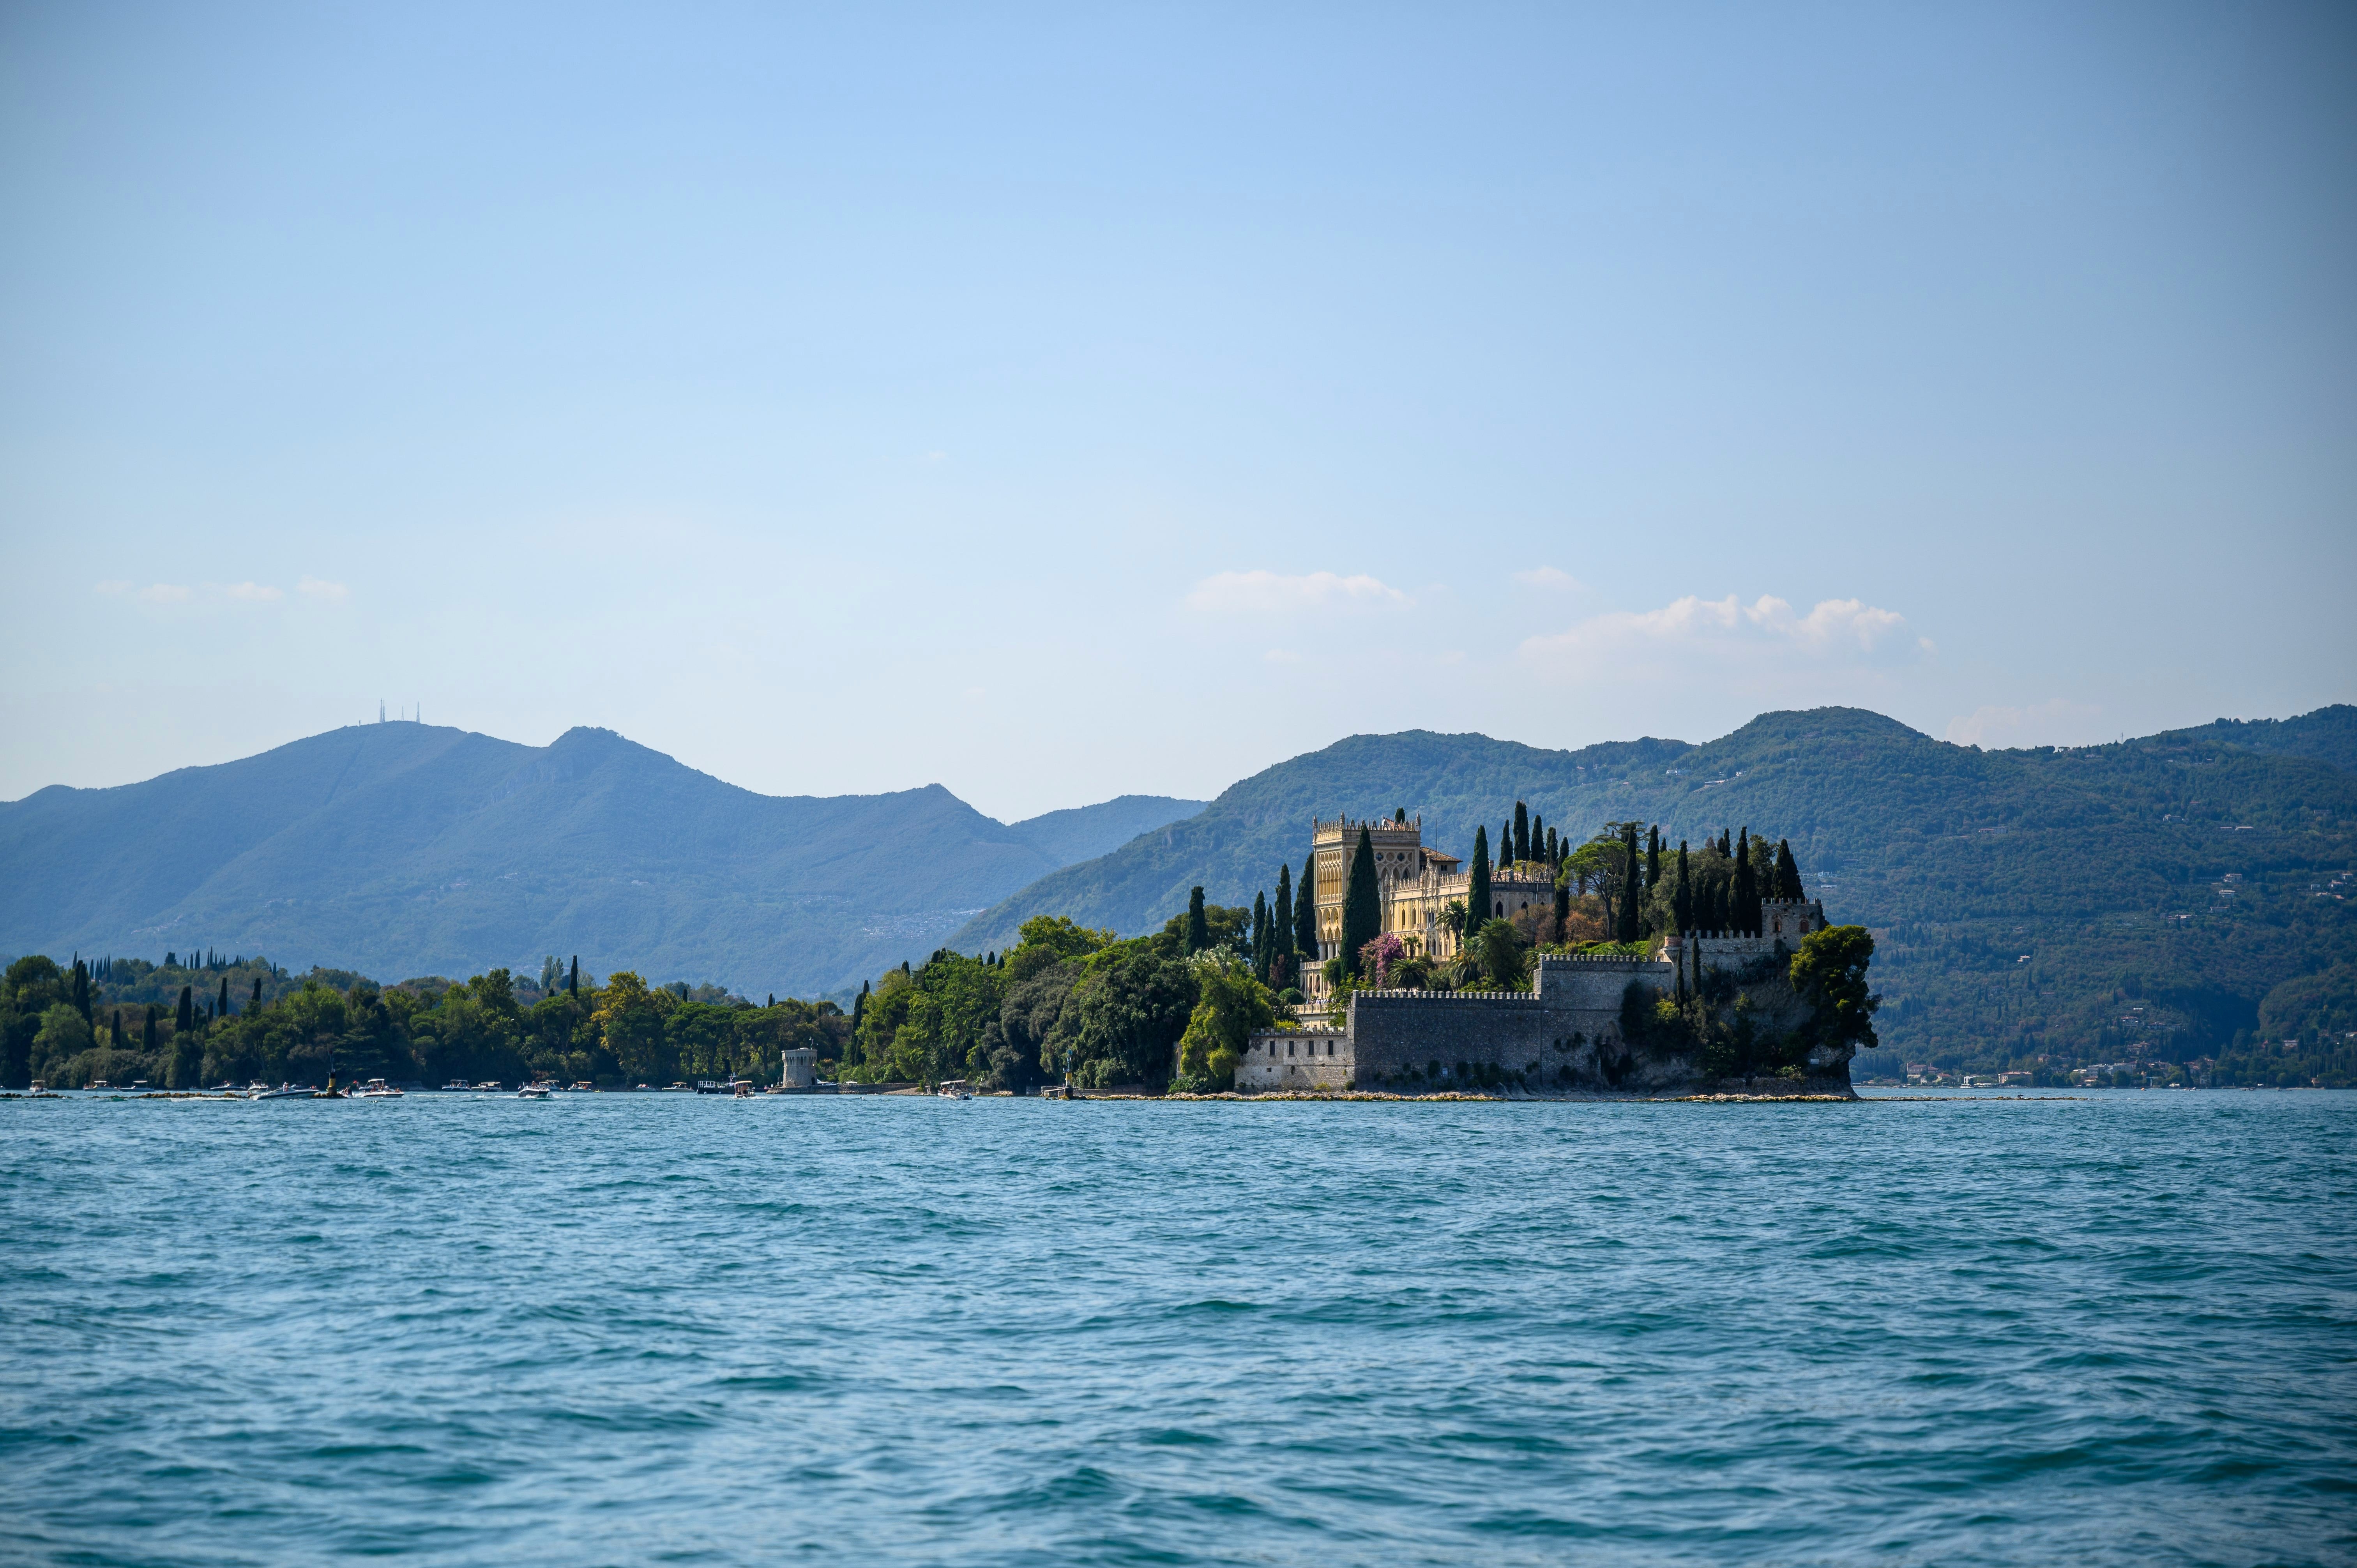 Isola del Garda has a long and varied history, including being used as a Roman burial ground